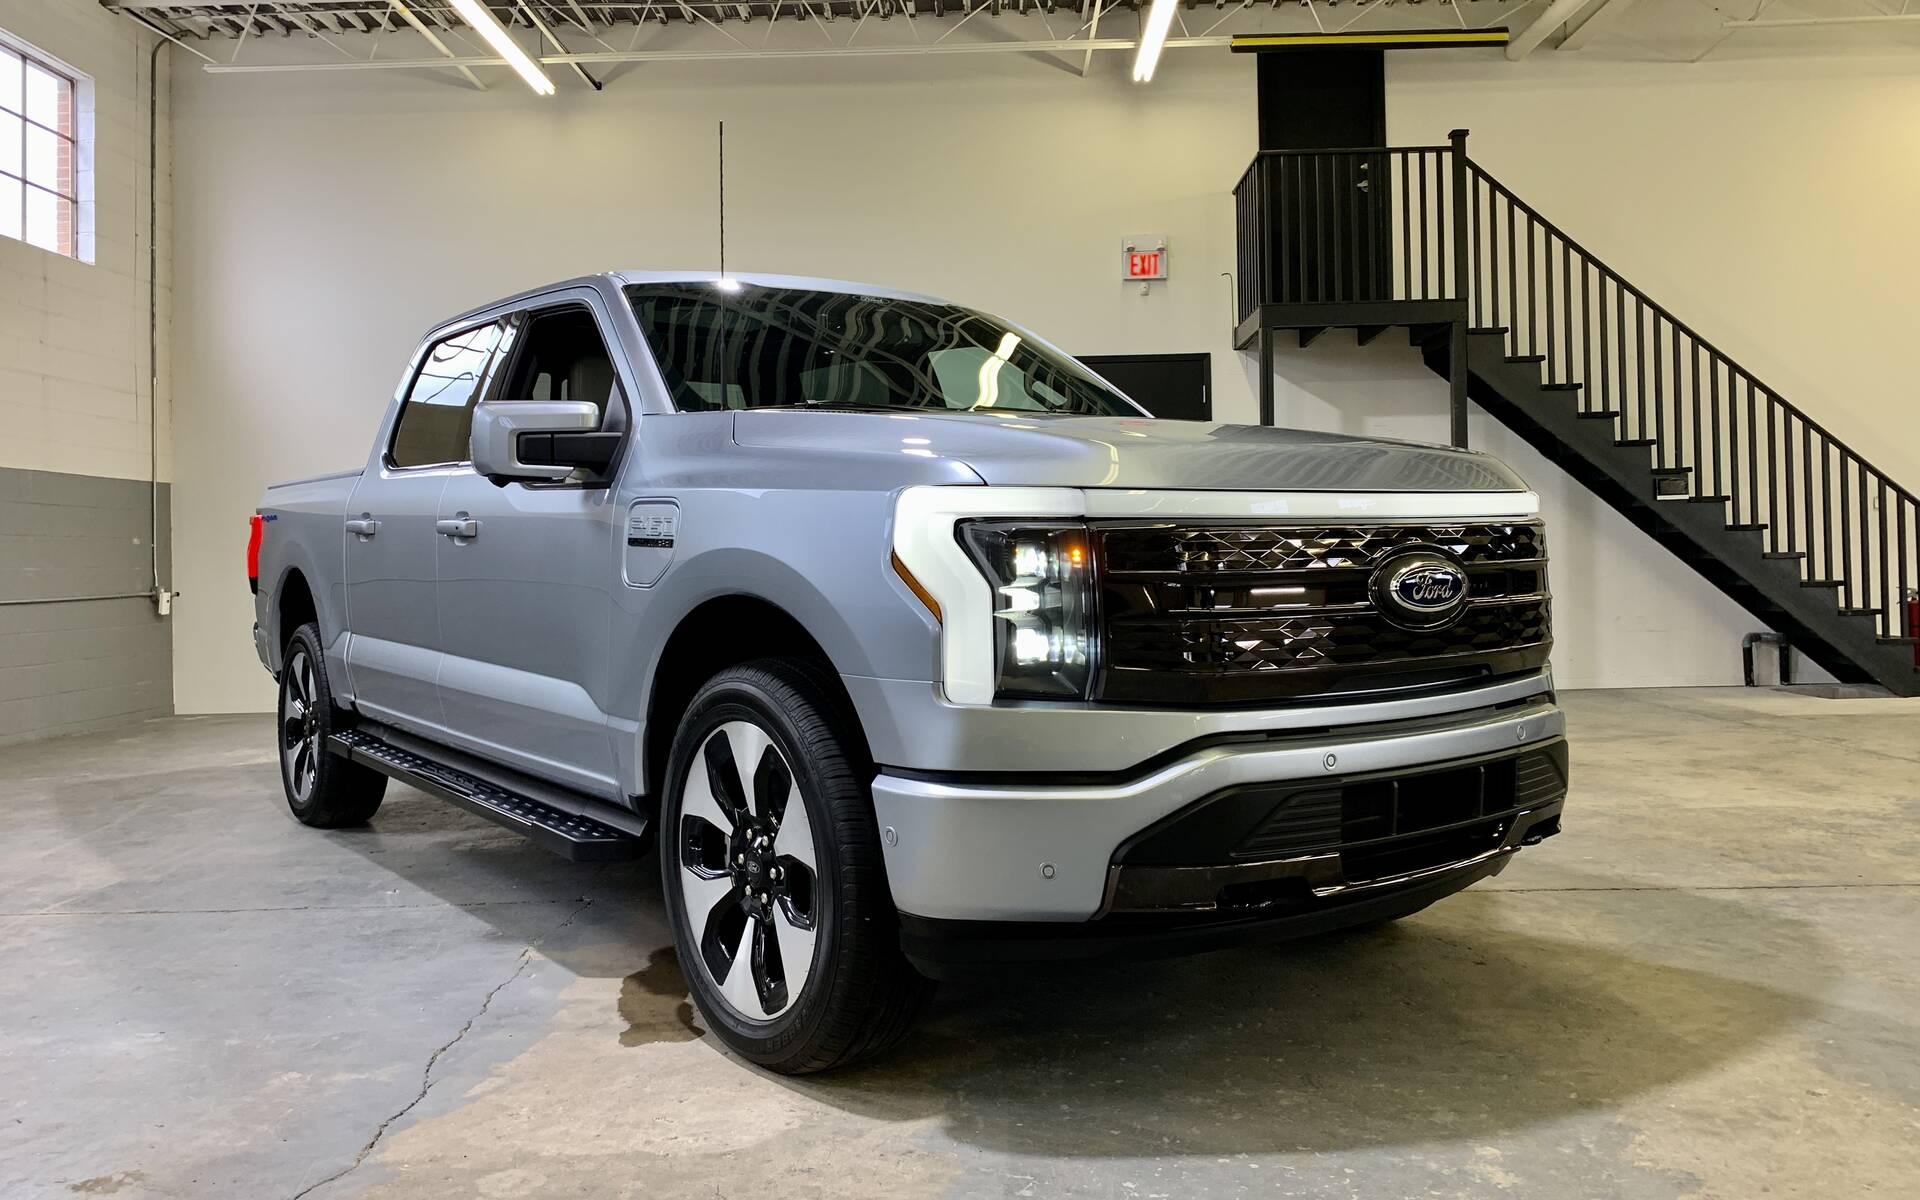 2022 Ford F150 Lightning The Car Guide Takes a Closer Look The Car